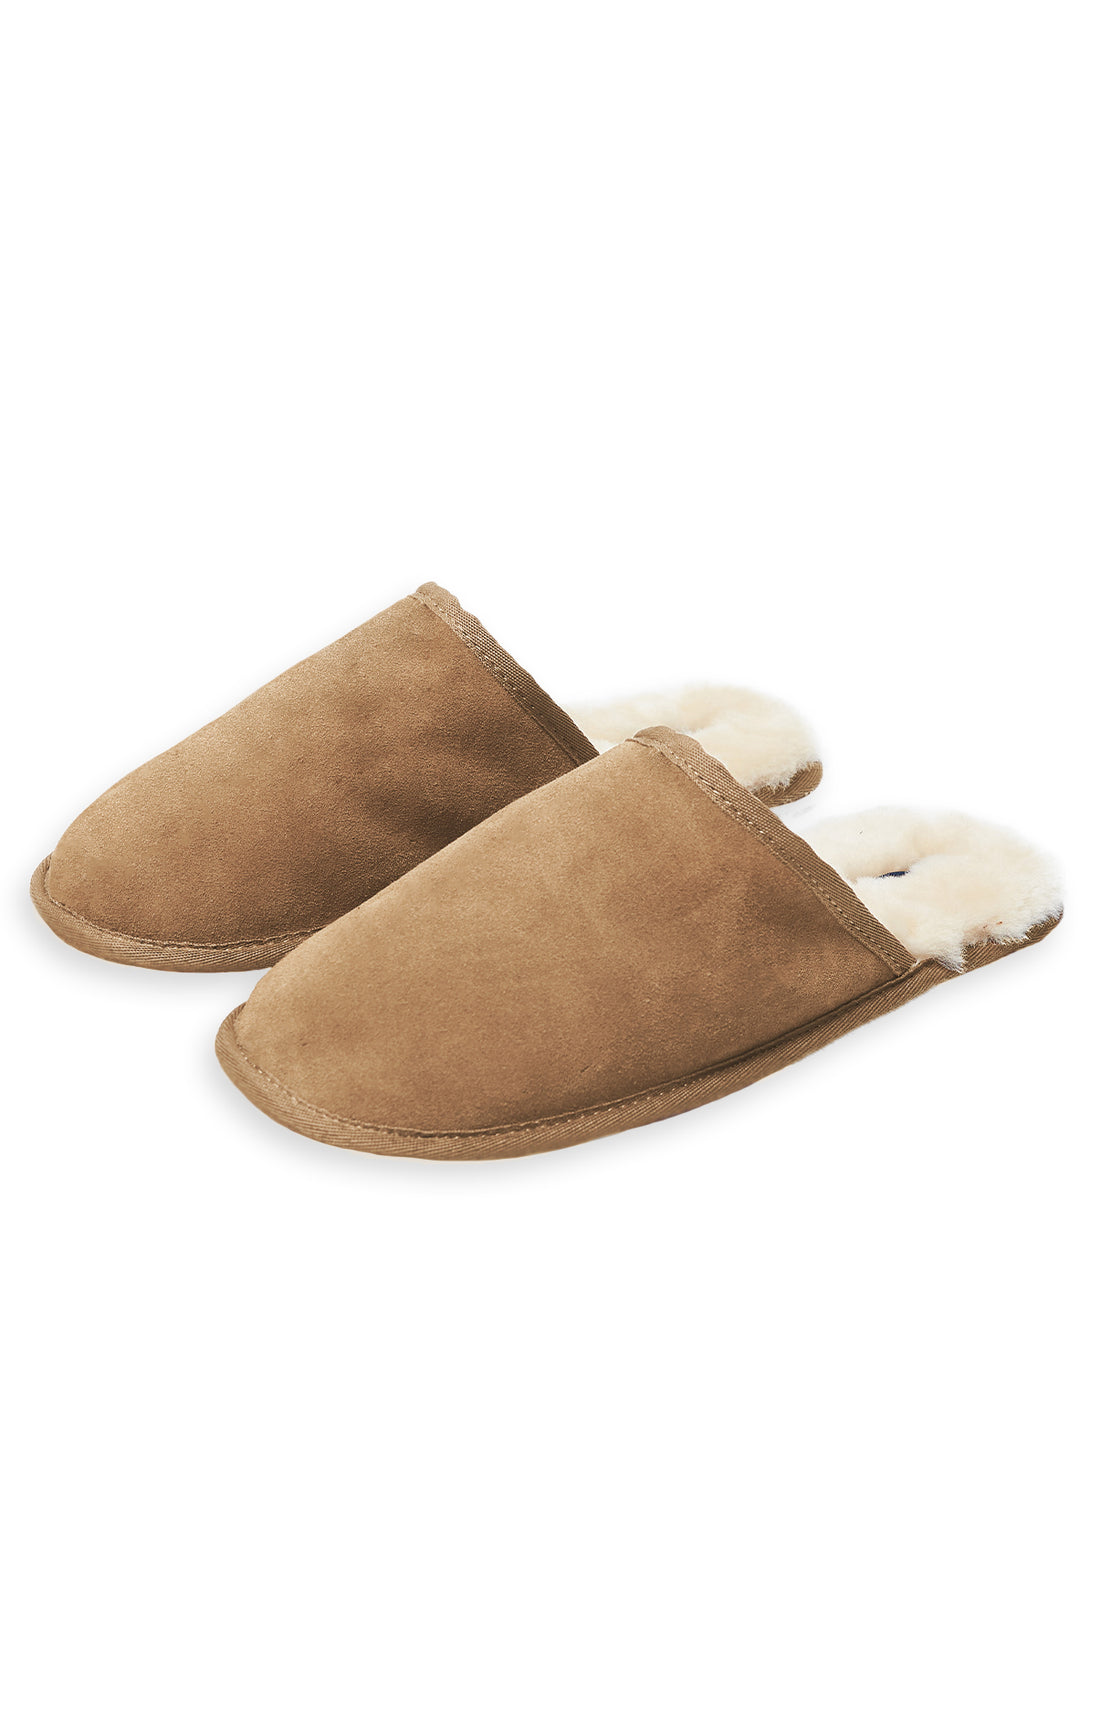 Mules - Wool and Suede